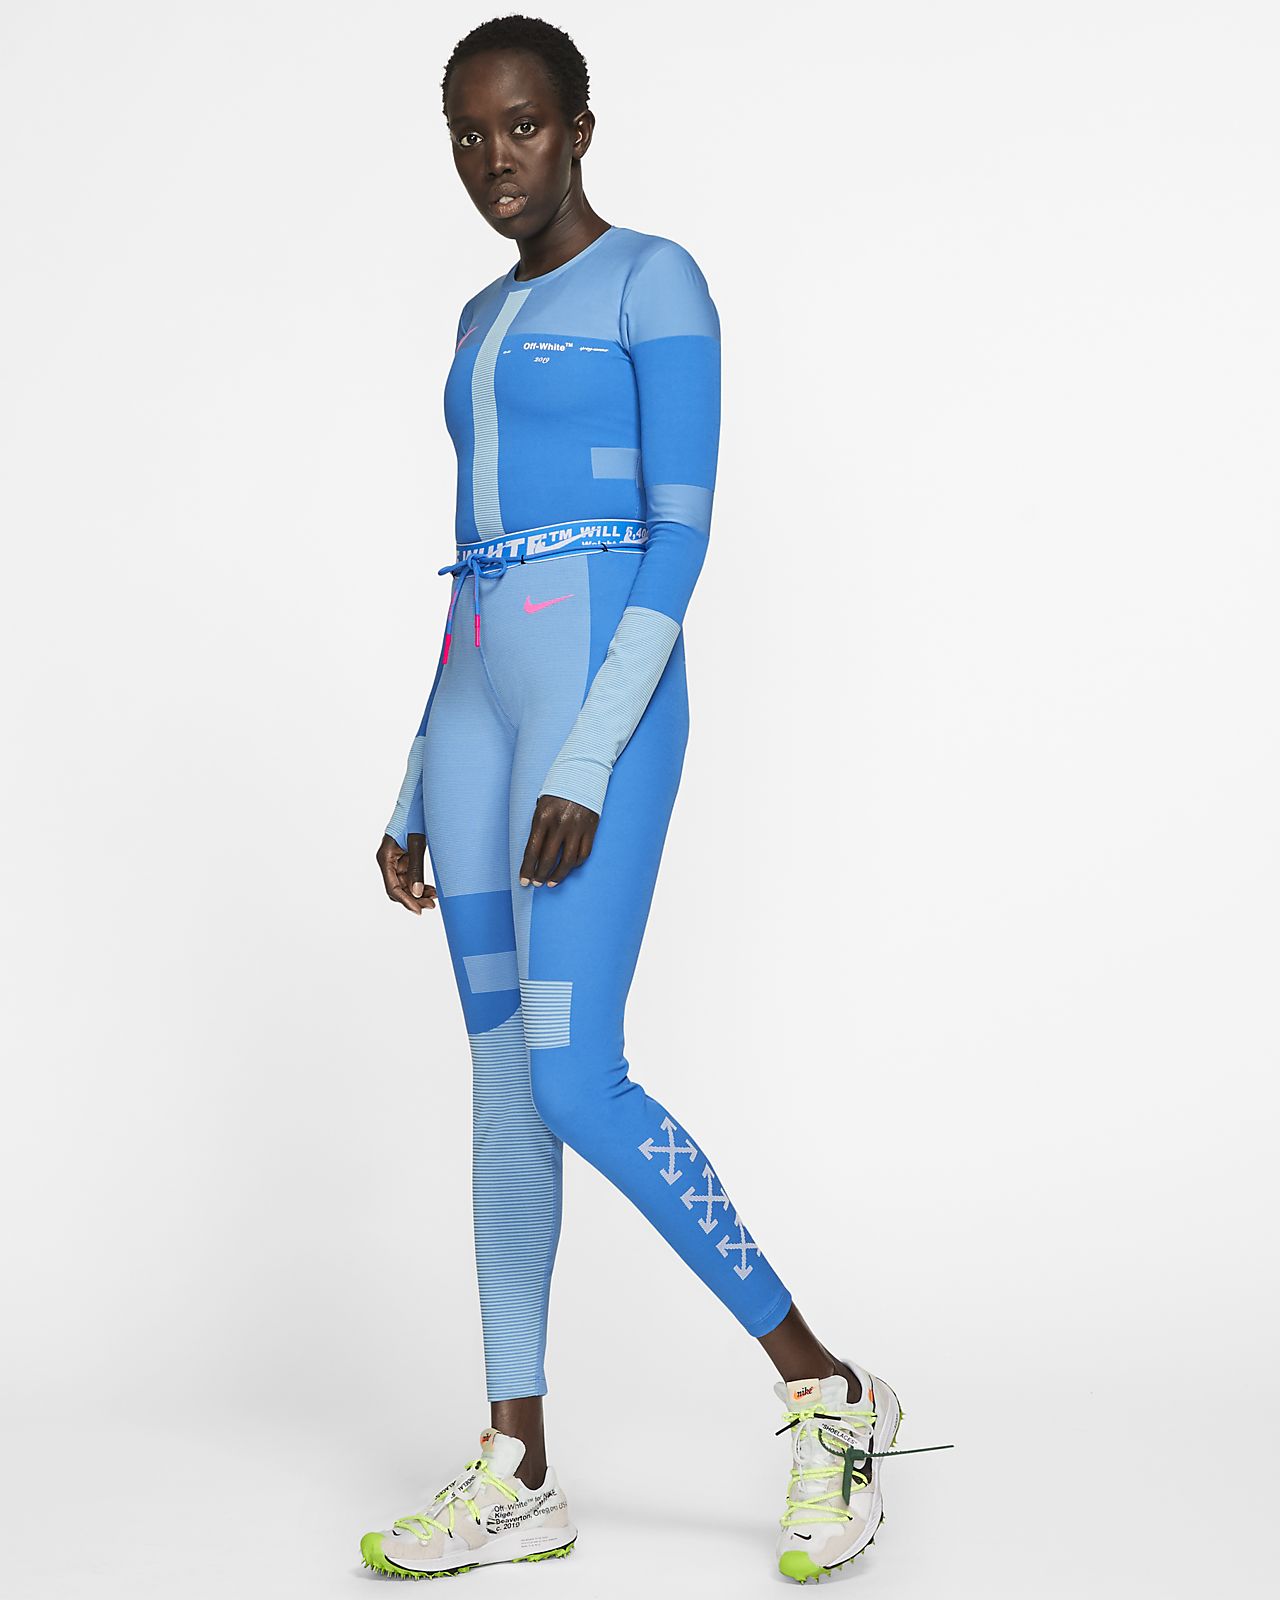 off white nike jogging suit womens